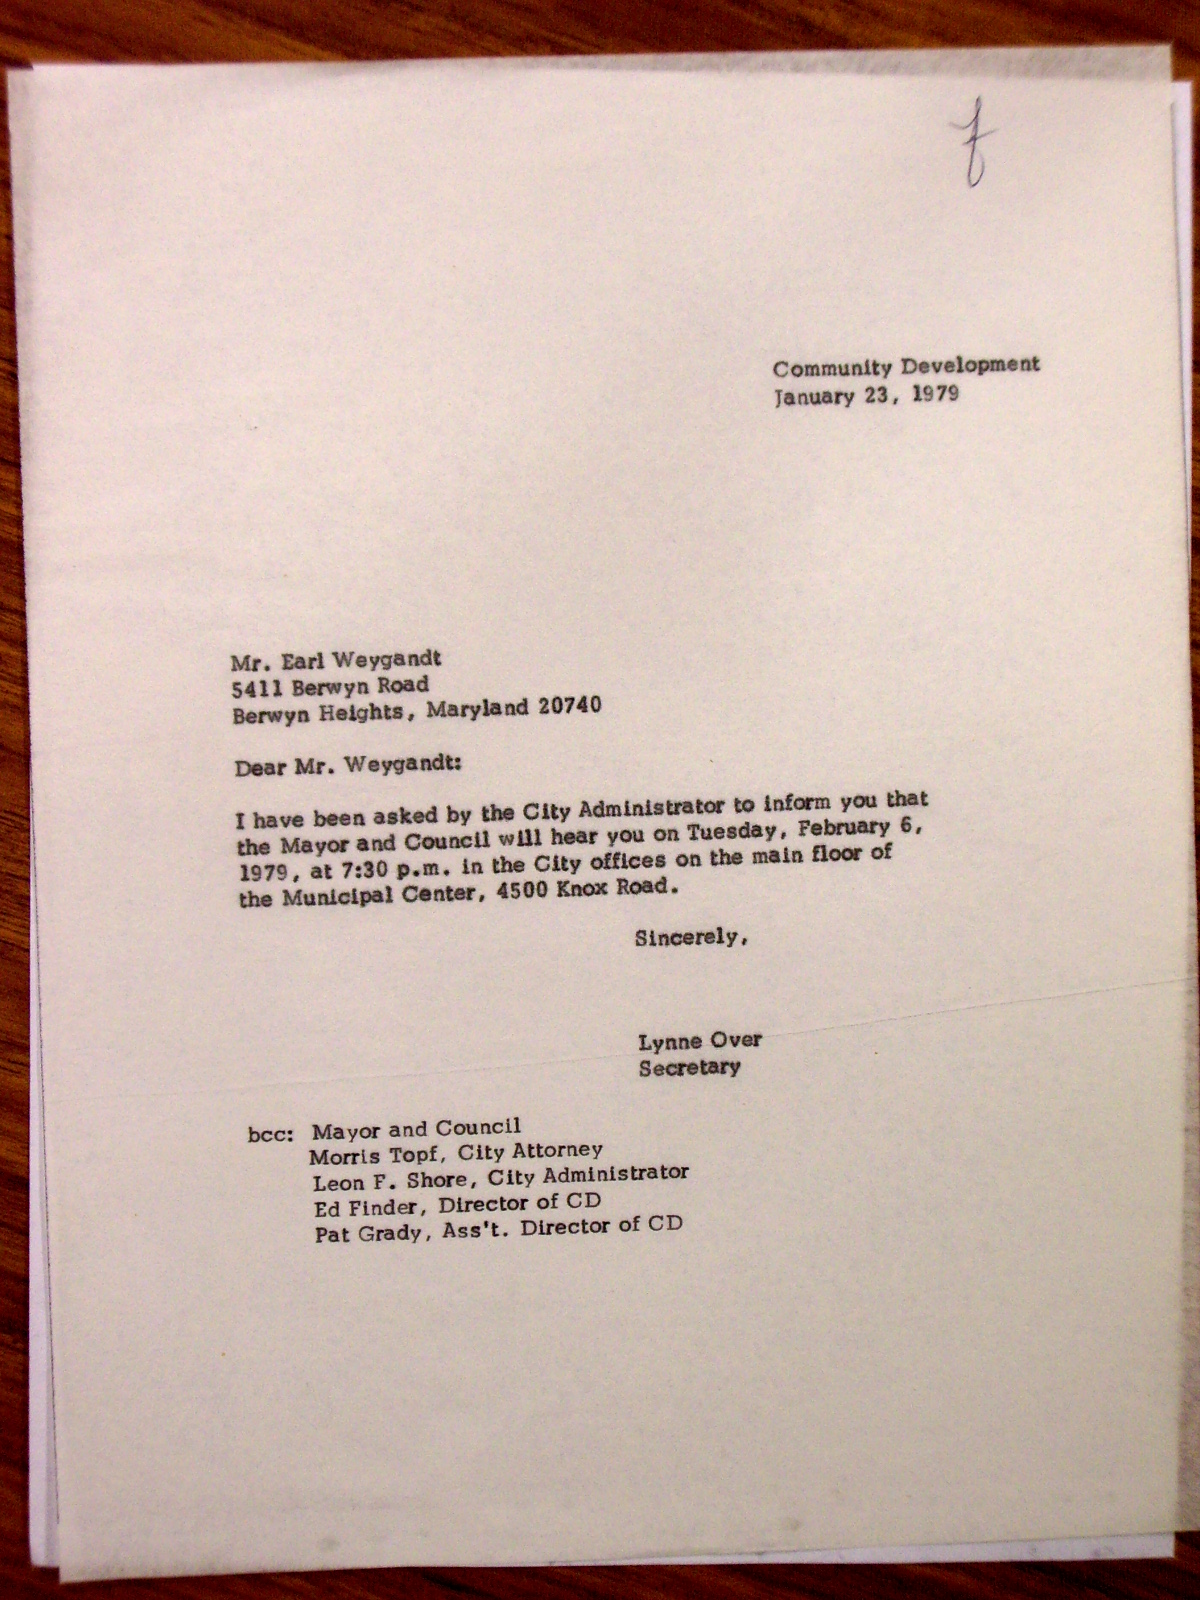 Letter to Earl Weygandt from Lynne Over